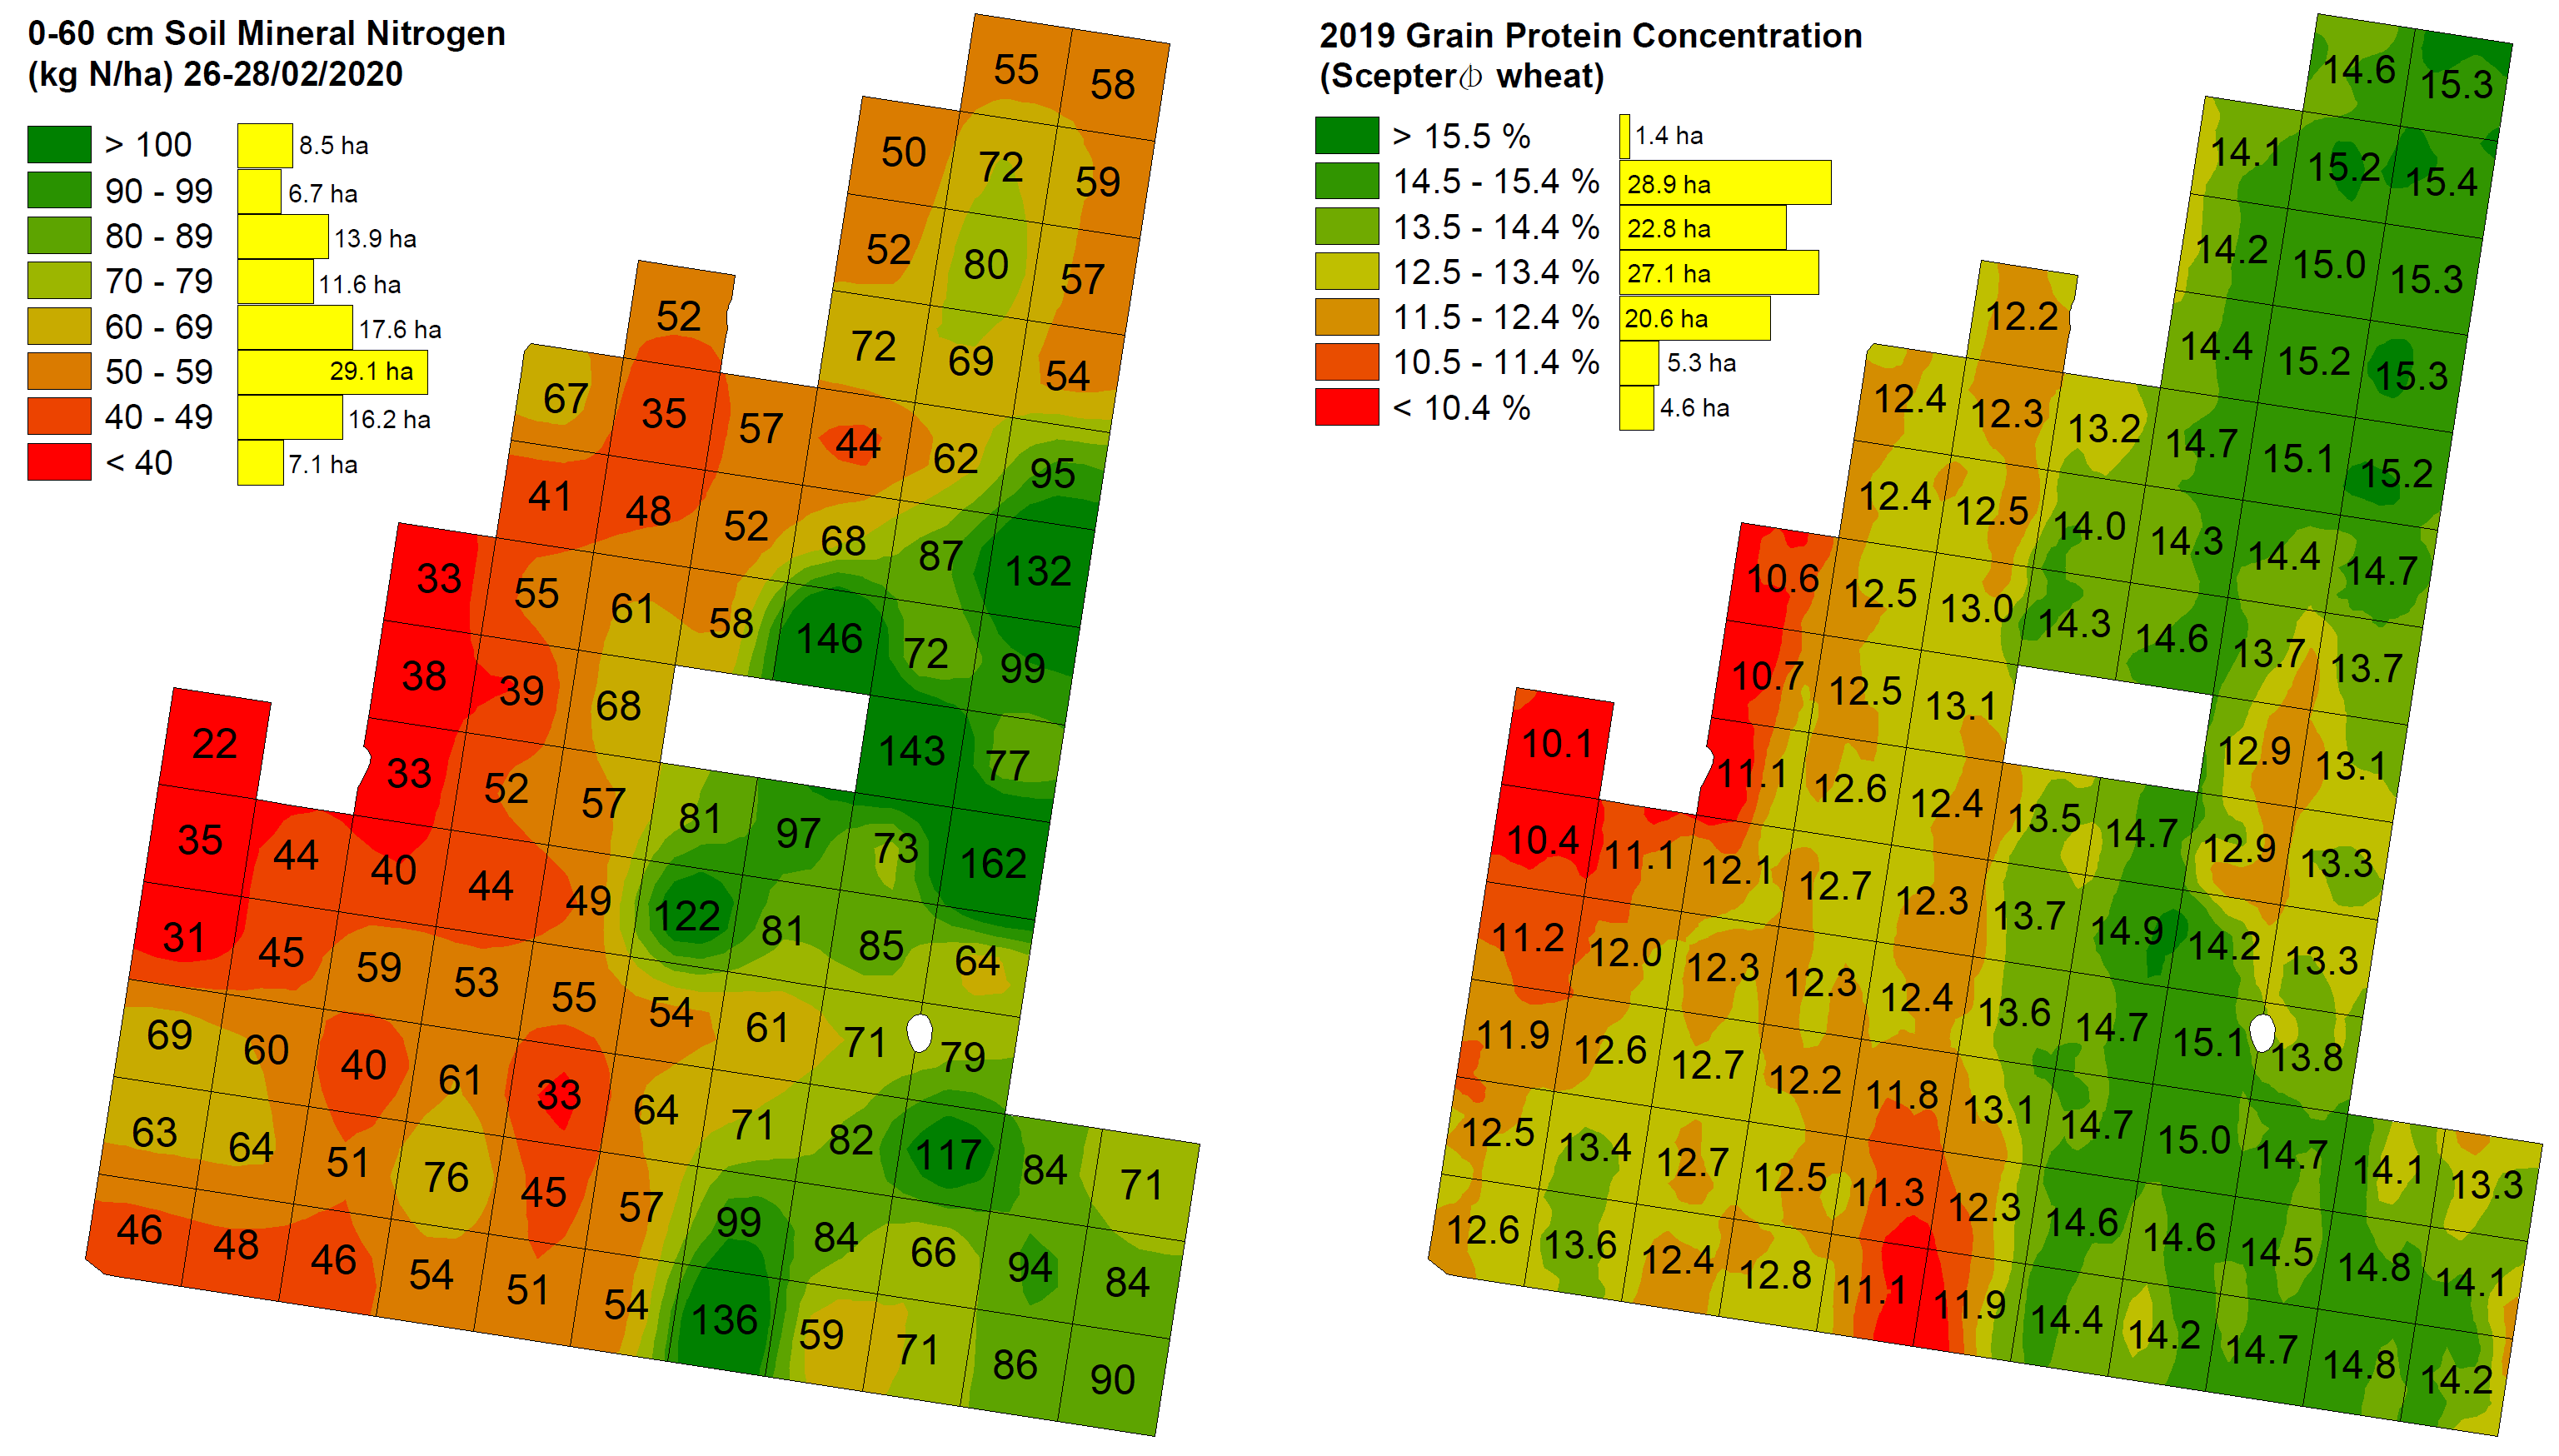 Figure 4 is a heat map of Temora site 0-60 cm SMN (kg N/ha) sampled 26-28/02/2020 (left) and 2019 wheat protein% (right). Pearson correlation coefficient (r) = 0.51, P < 0.0001. The far north of the paddock is a low-lying area that yielded poorly and was most likely severely impacted by both moisture stress and frost in 2019. Each cell size is 108 x 108 m, total area 110.7 ha.